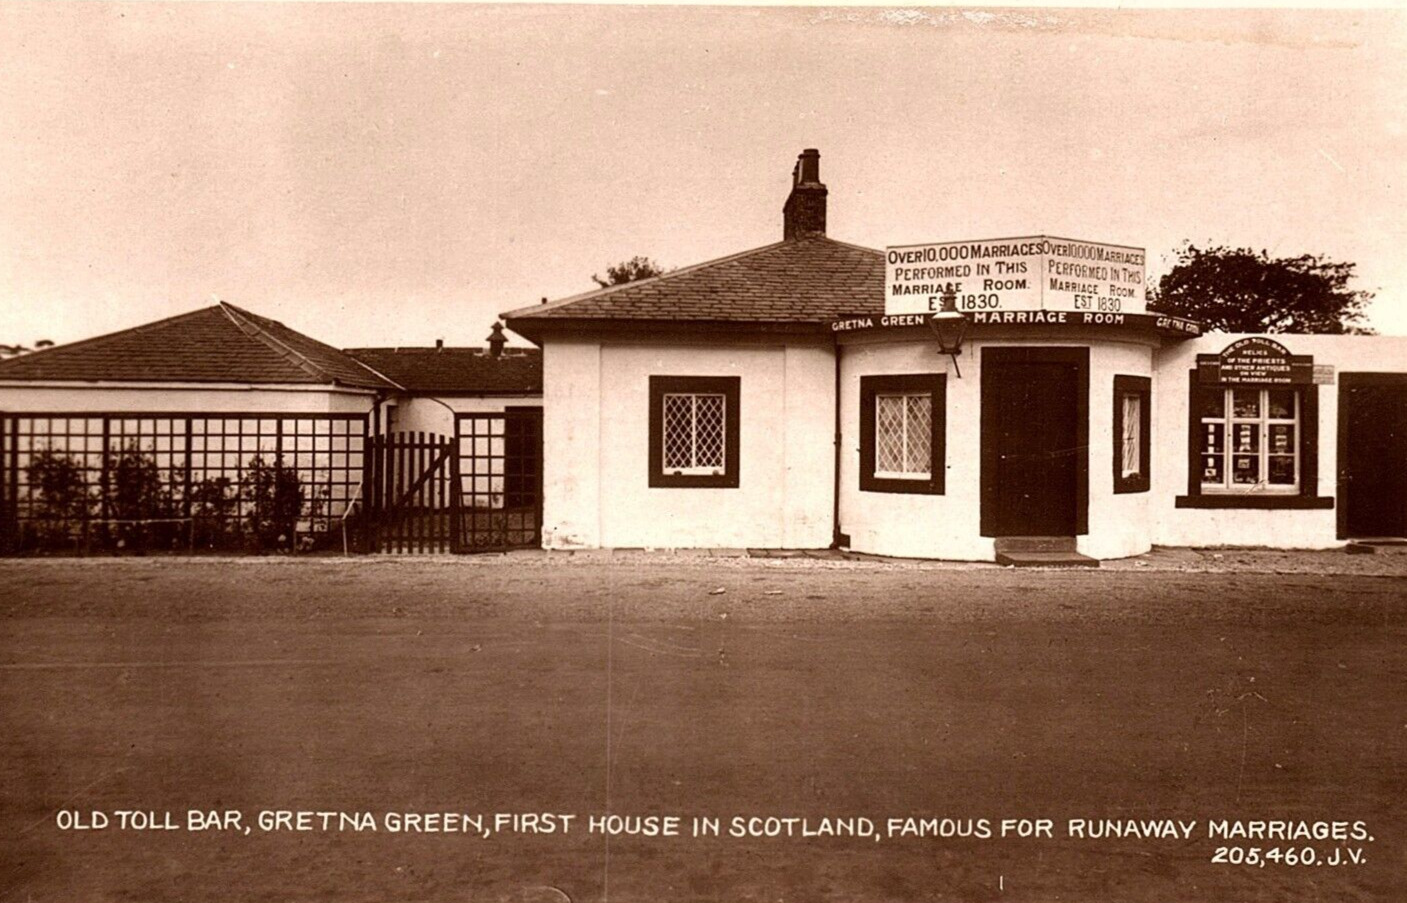 c1915 SCOTLAND OLD TOLL BAR GRETNA GREEN 1st HOUSE MARRIAGES RPPC POSTCARD P1646